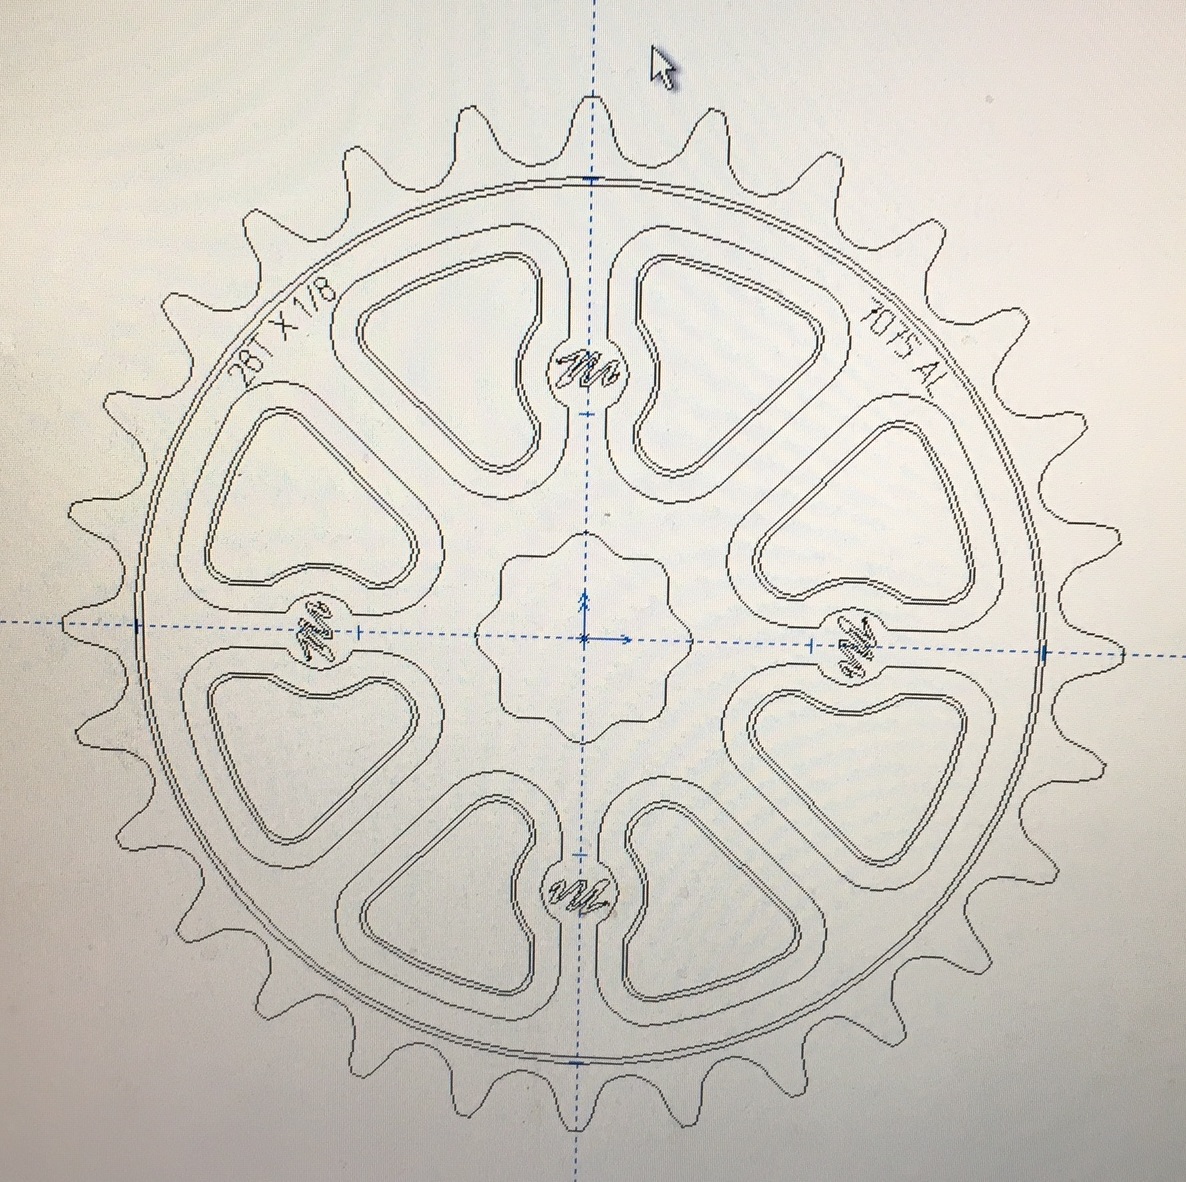 The Original CAD drawing of the Madera Helm Spline Drive Sprocket.